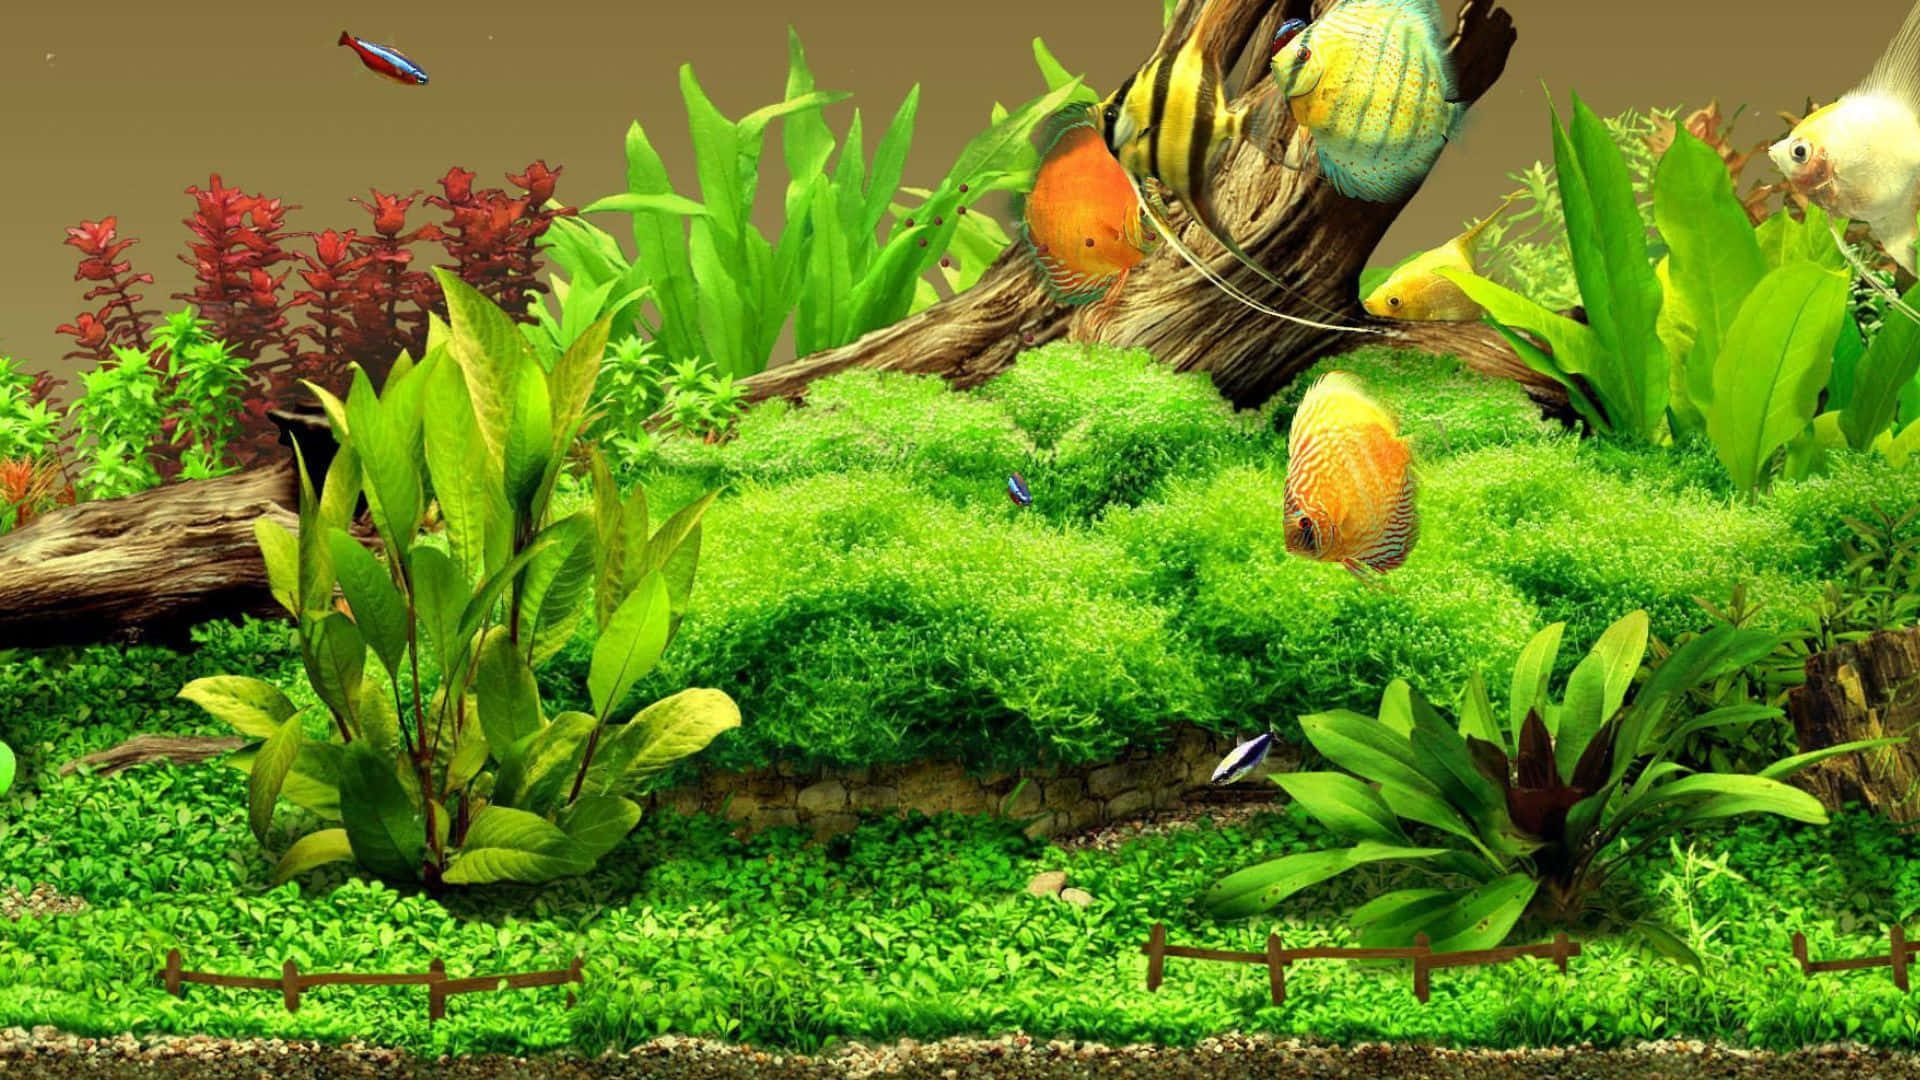 A Screenshot Of An Aquarium With Plants And Fish